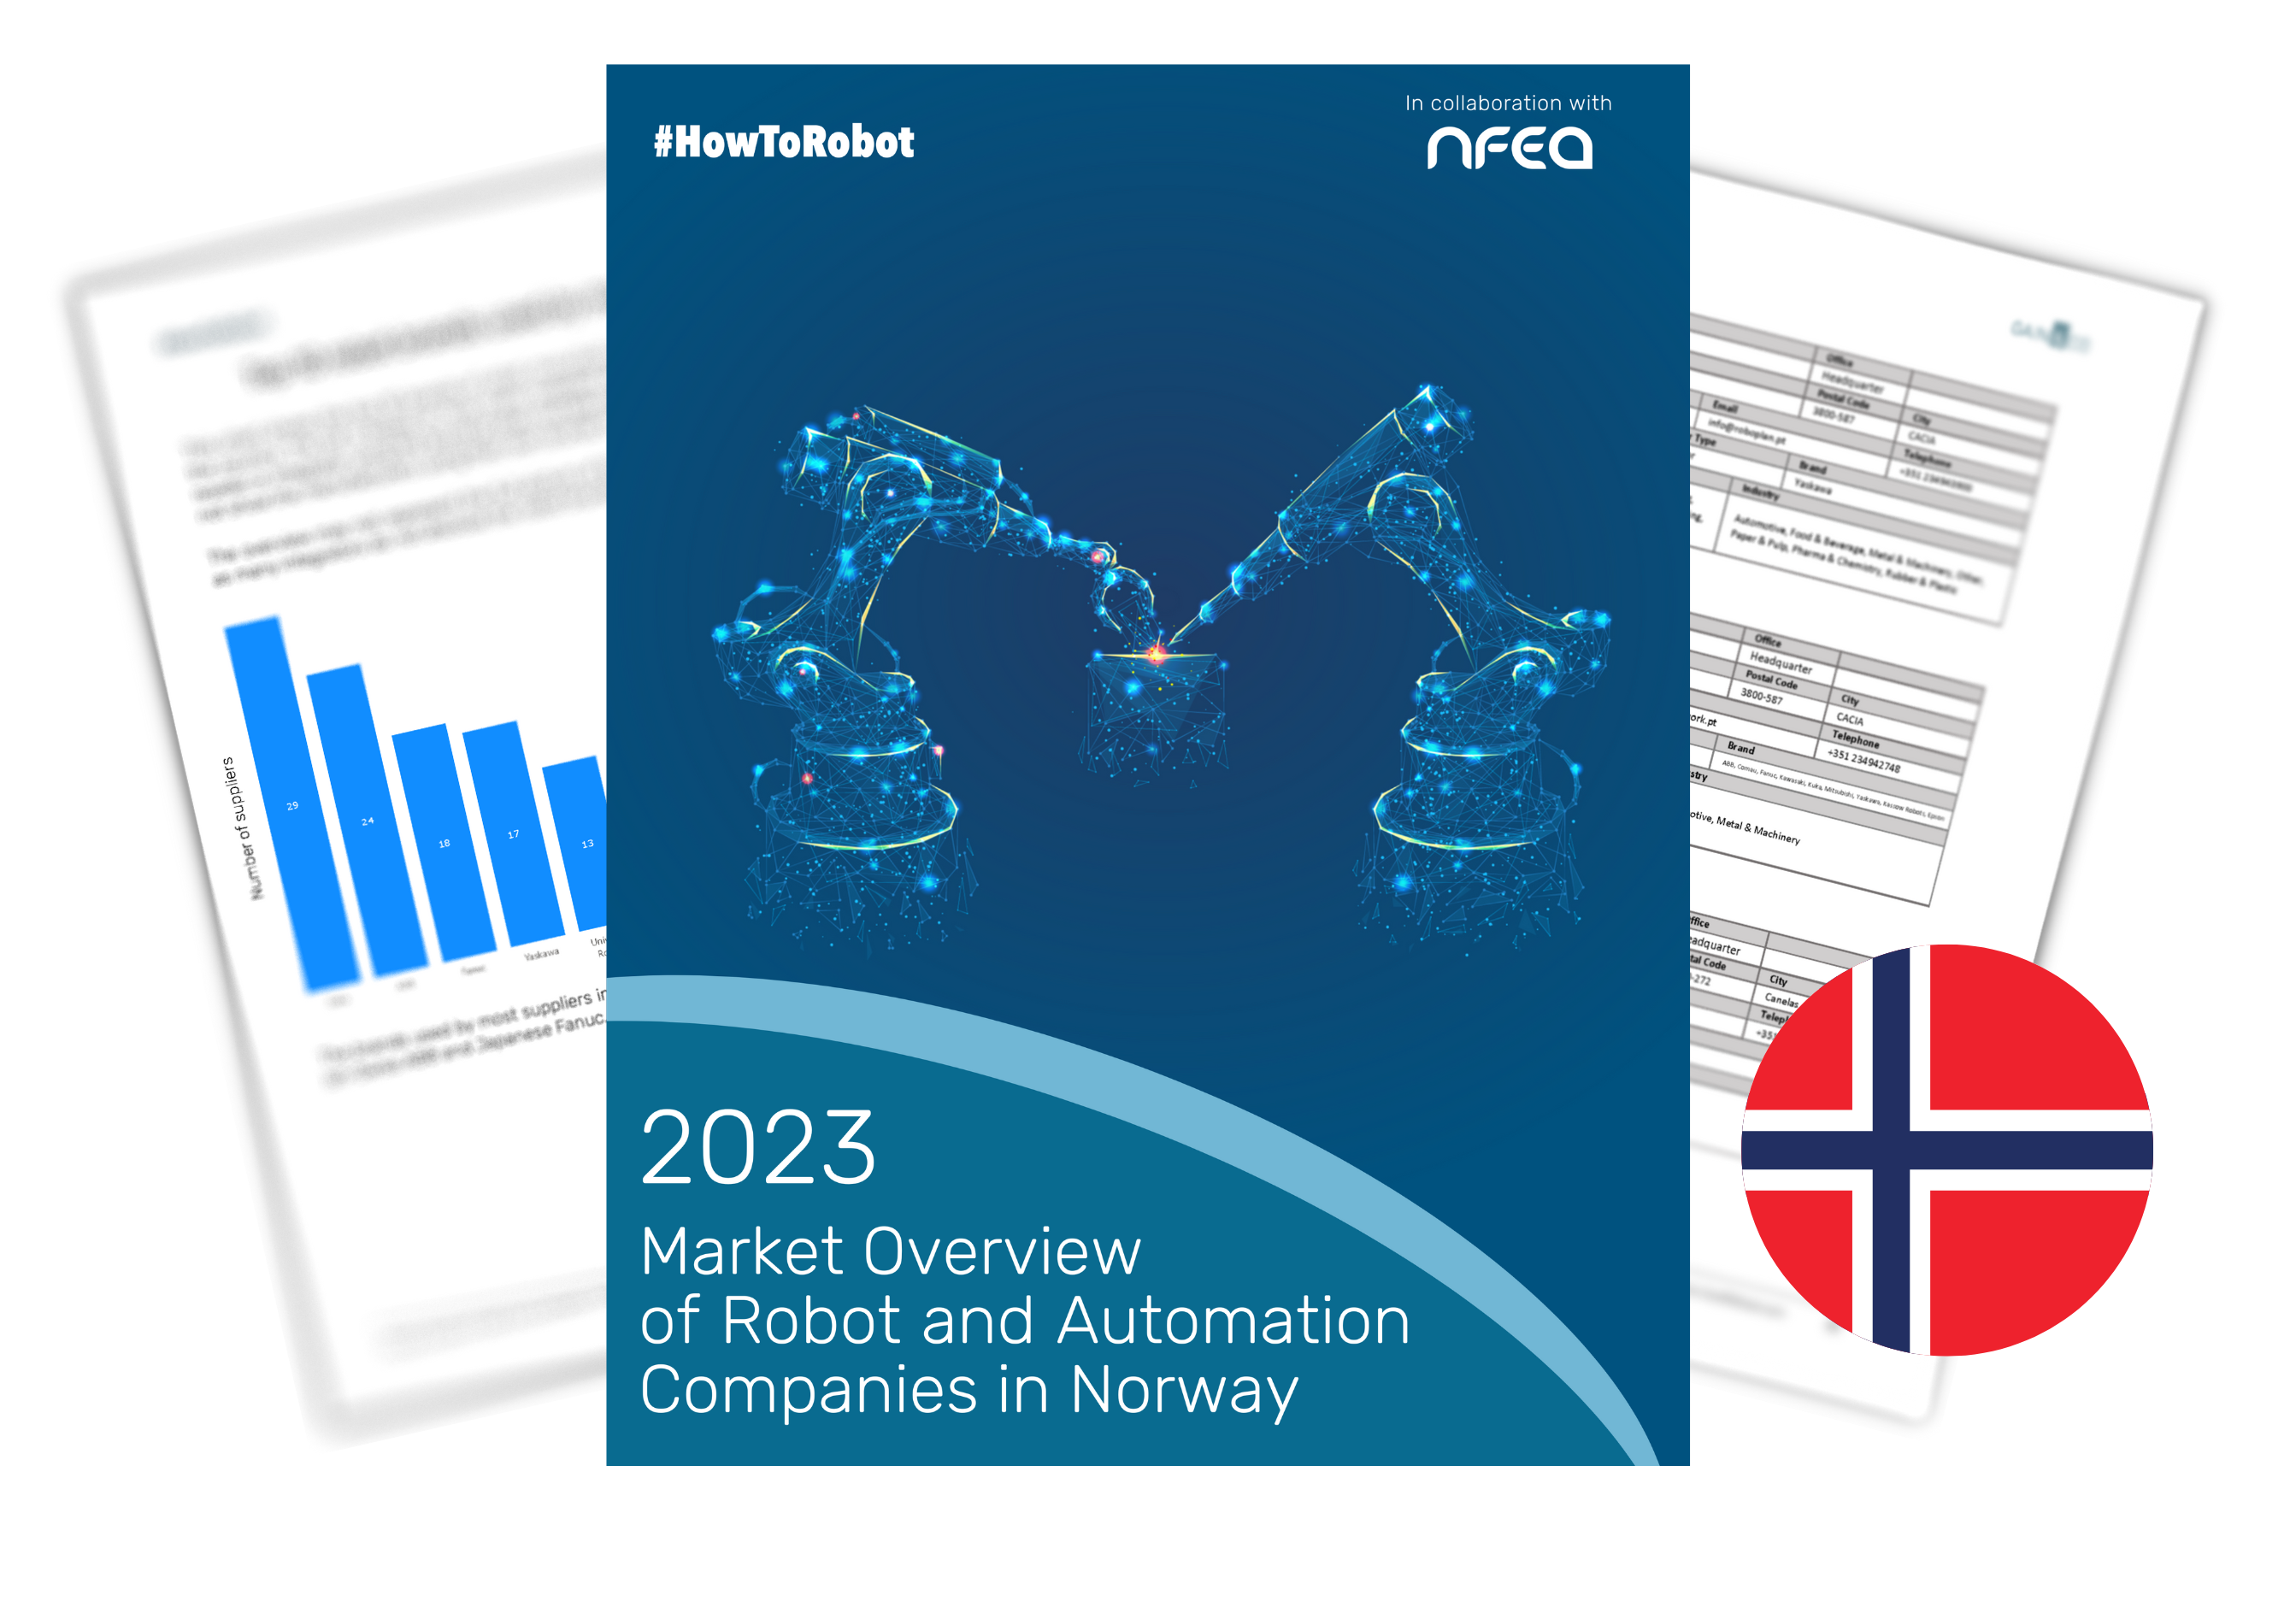 Market Overview of Robot and Automation Companies in Norway